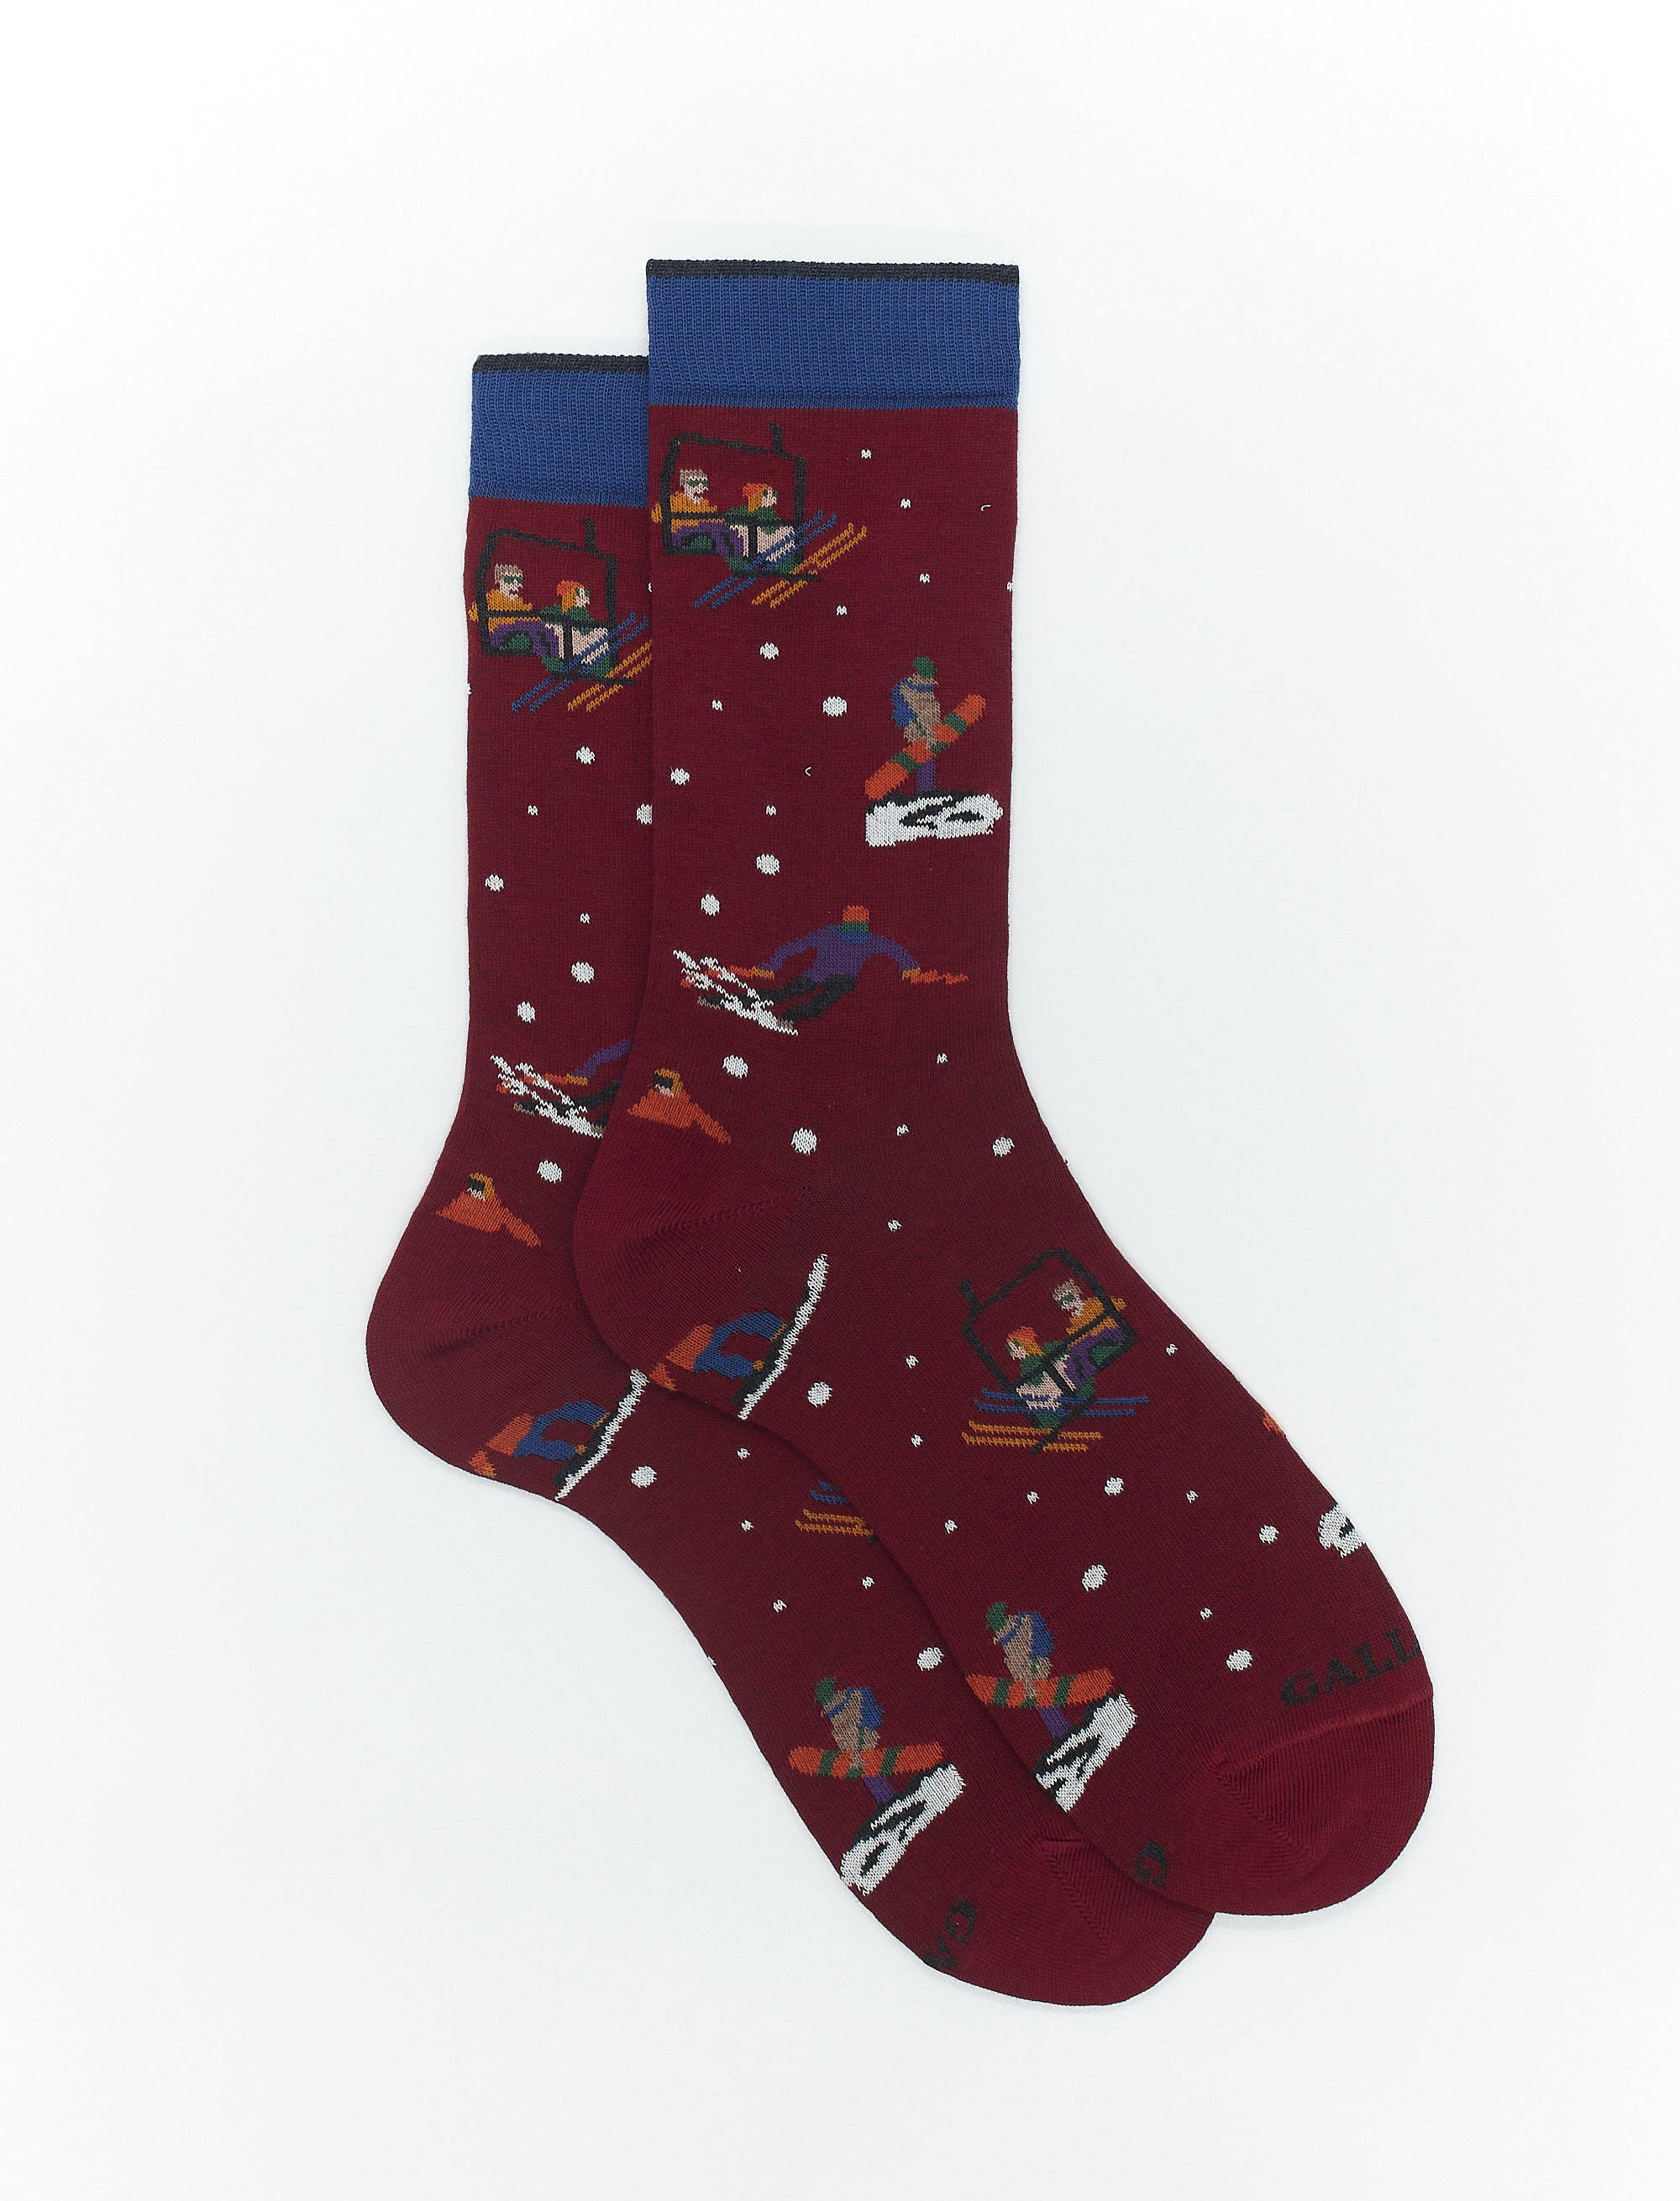 Women's short amaranth cotton socks with skier motif - The FW Edition | Gallo 1927 - Official Online Shop